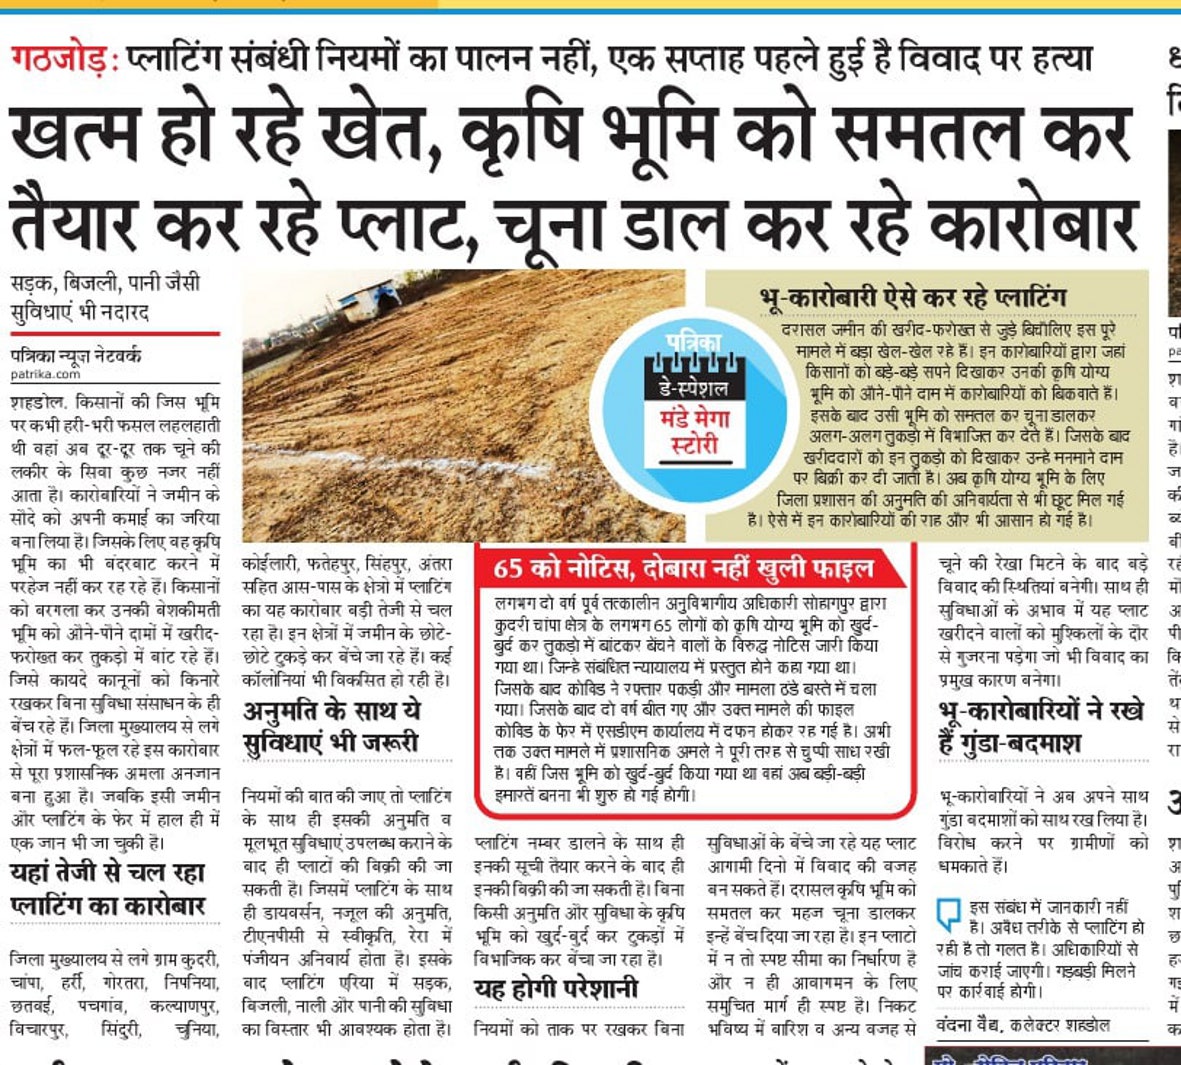 Strange: Here the pond disappeared to earn crores, investigation was done but the officers were not giving the report